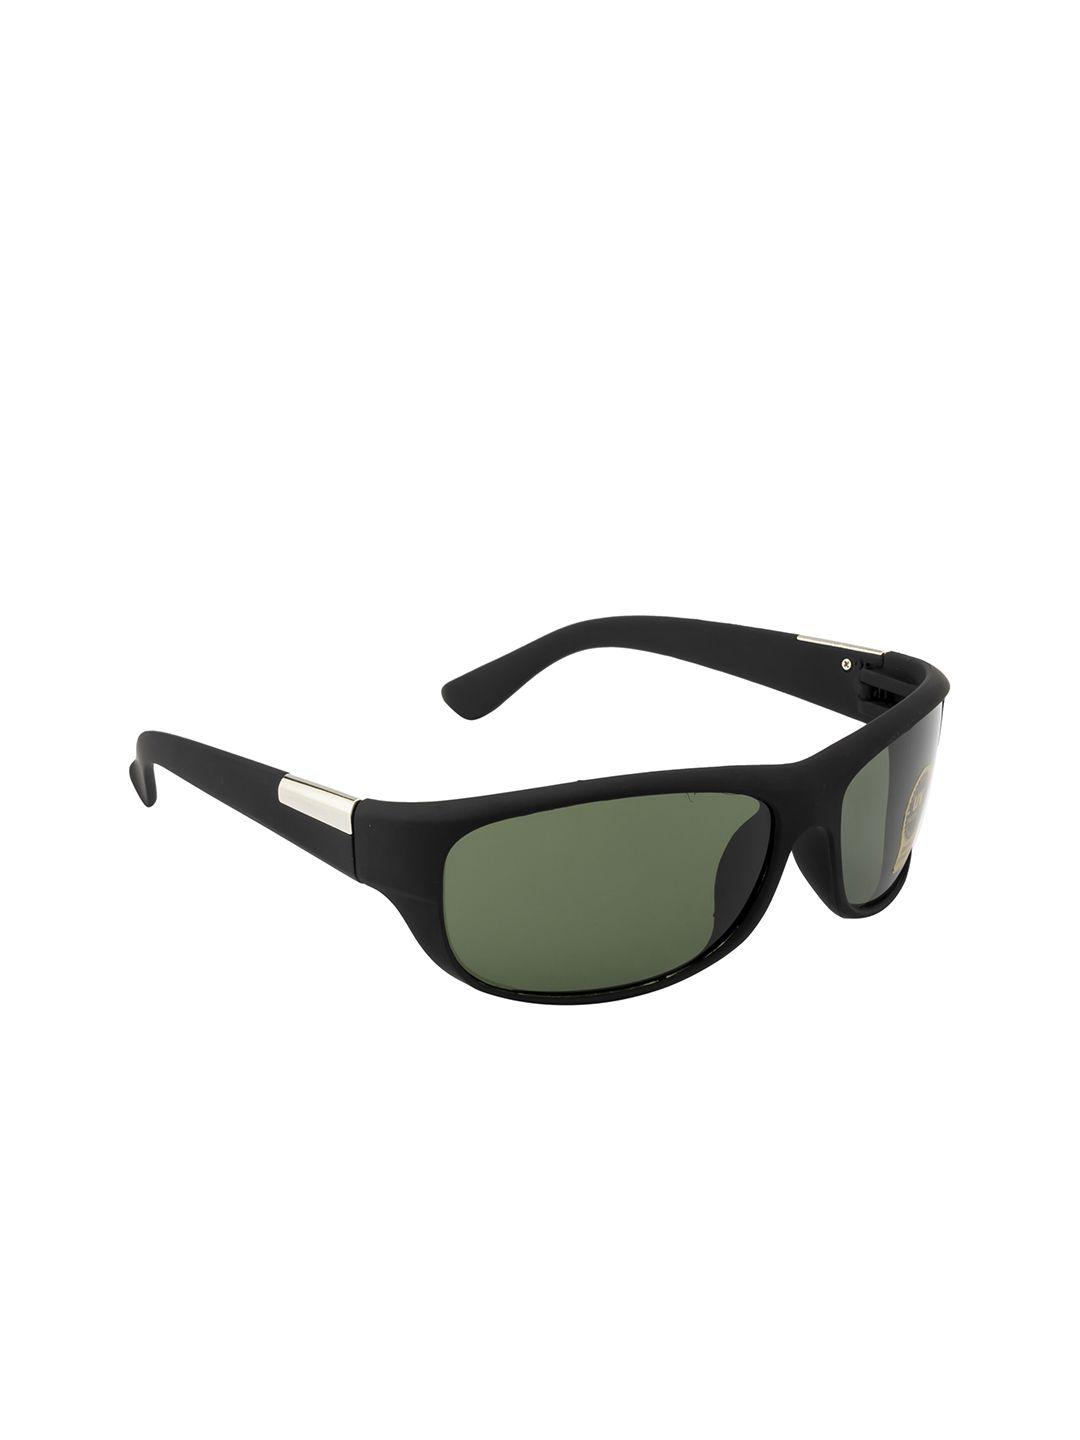 roadster adults green lens & black sports sunglasses with uv protected lens rd-m22387